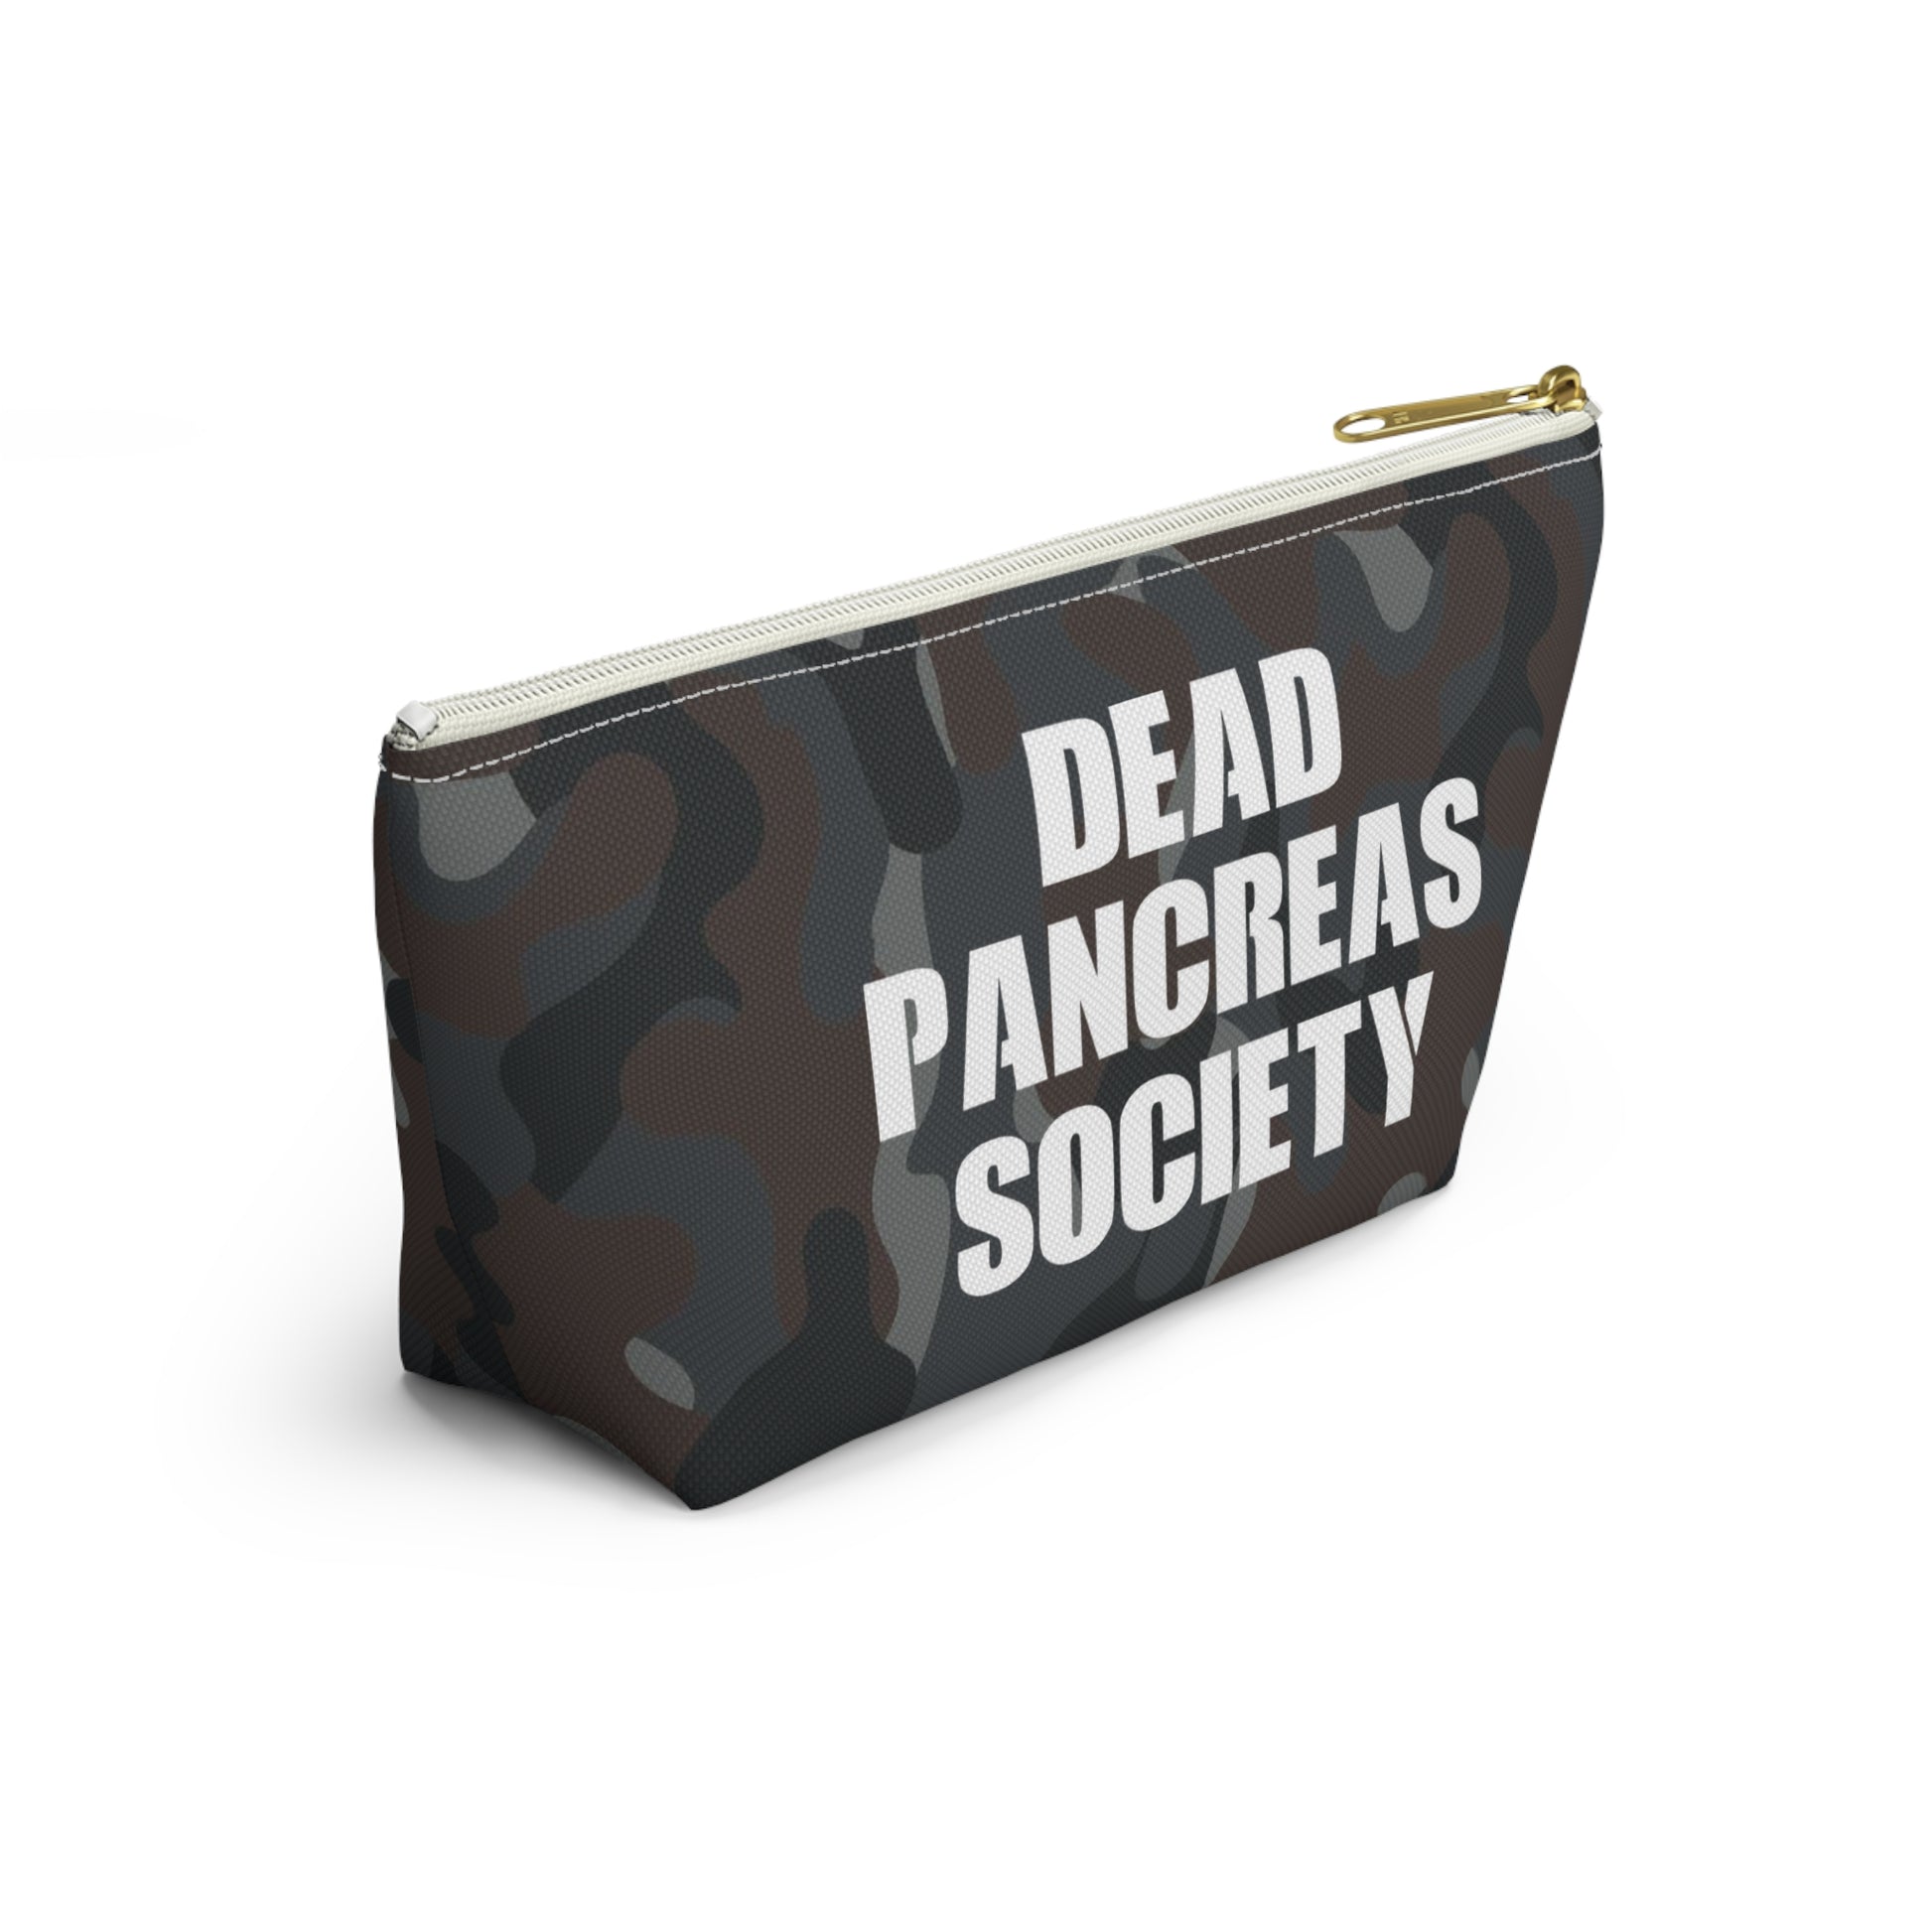 Dead Pancreas Society Bag, Diabetes Fun Diabetic Supply Carrying Case DT1 Gift Camo Accessory Small Large Zipper Pouch w T-bottom Starcove Fashion